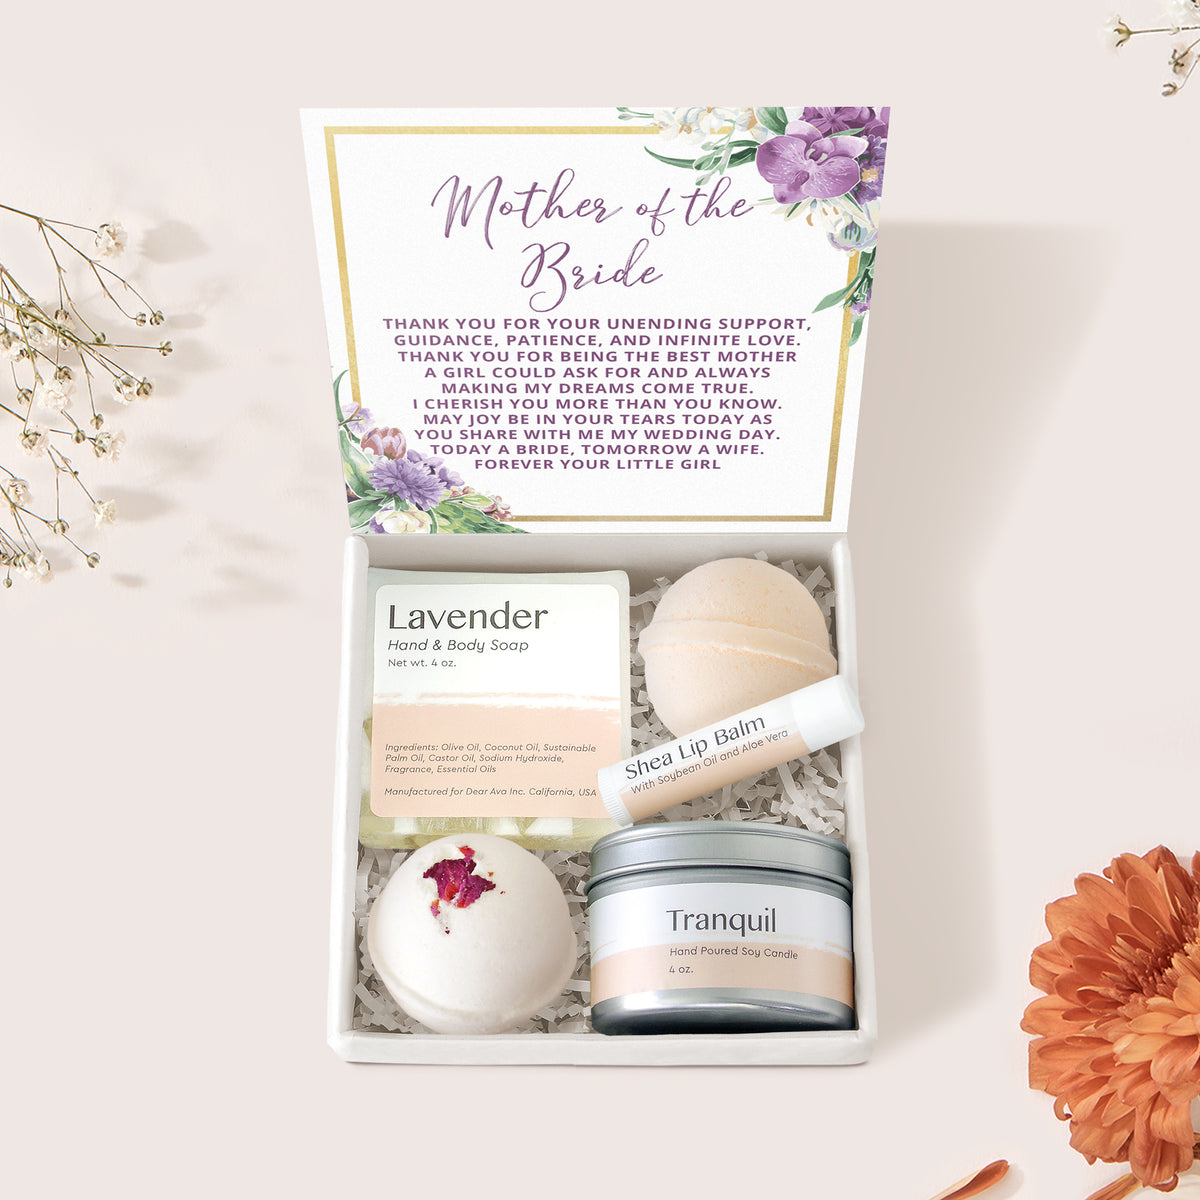 Mother of the Bride Spa Gift Box